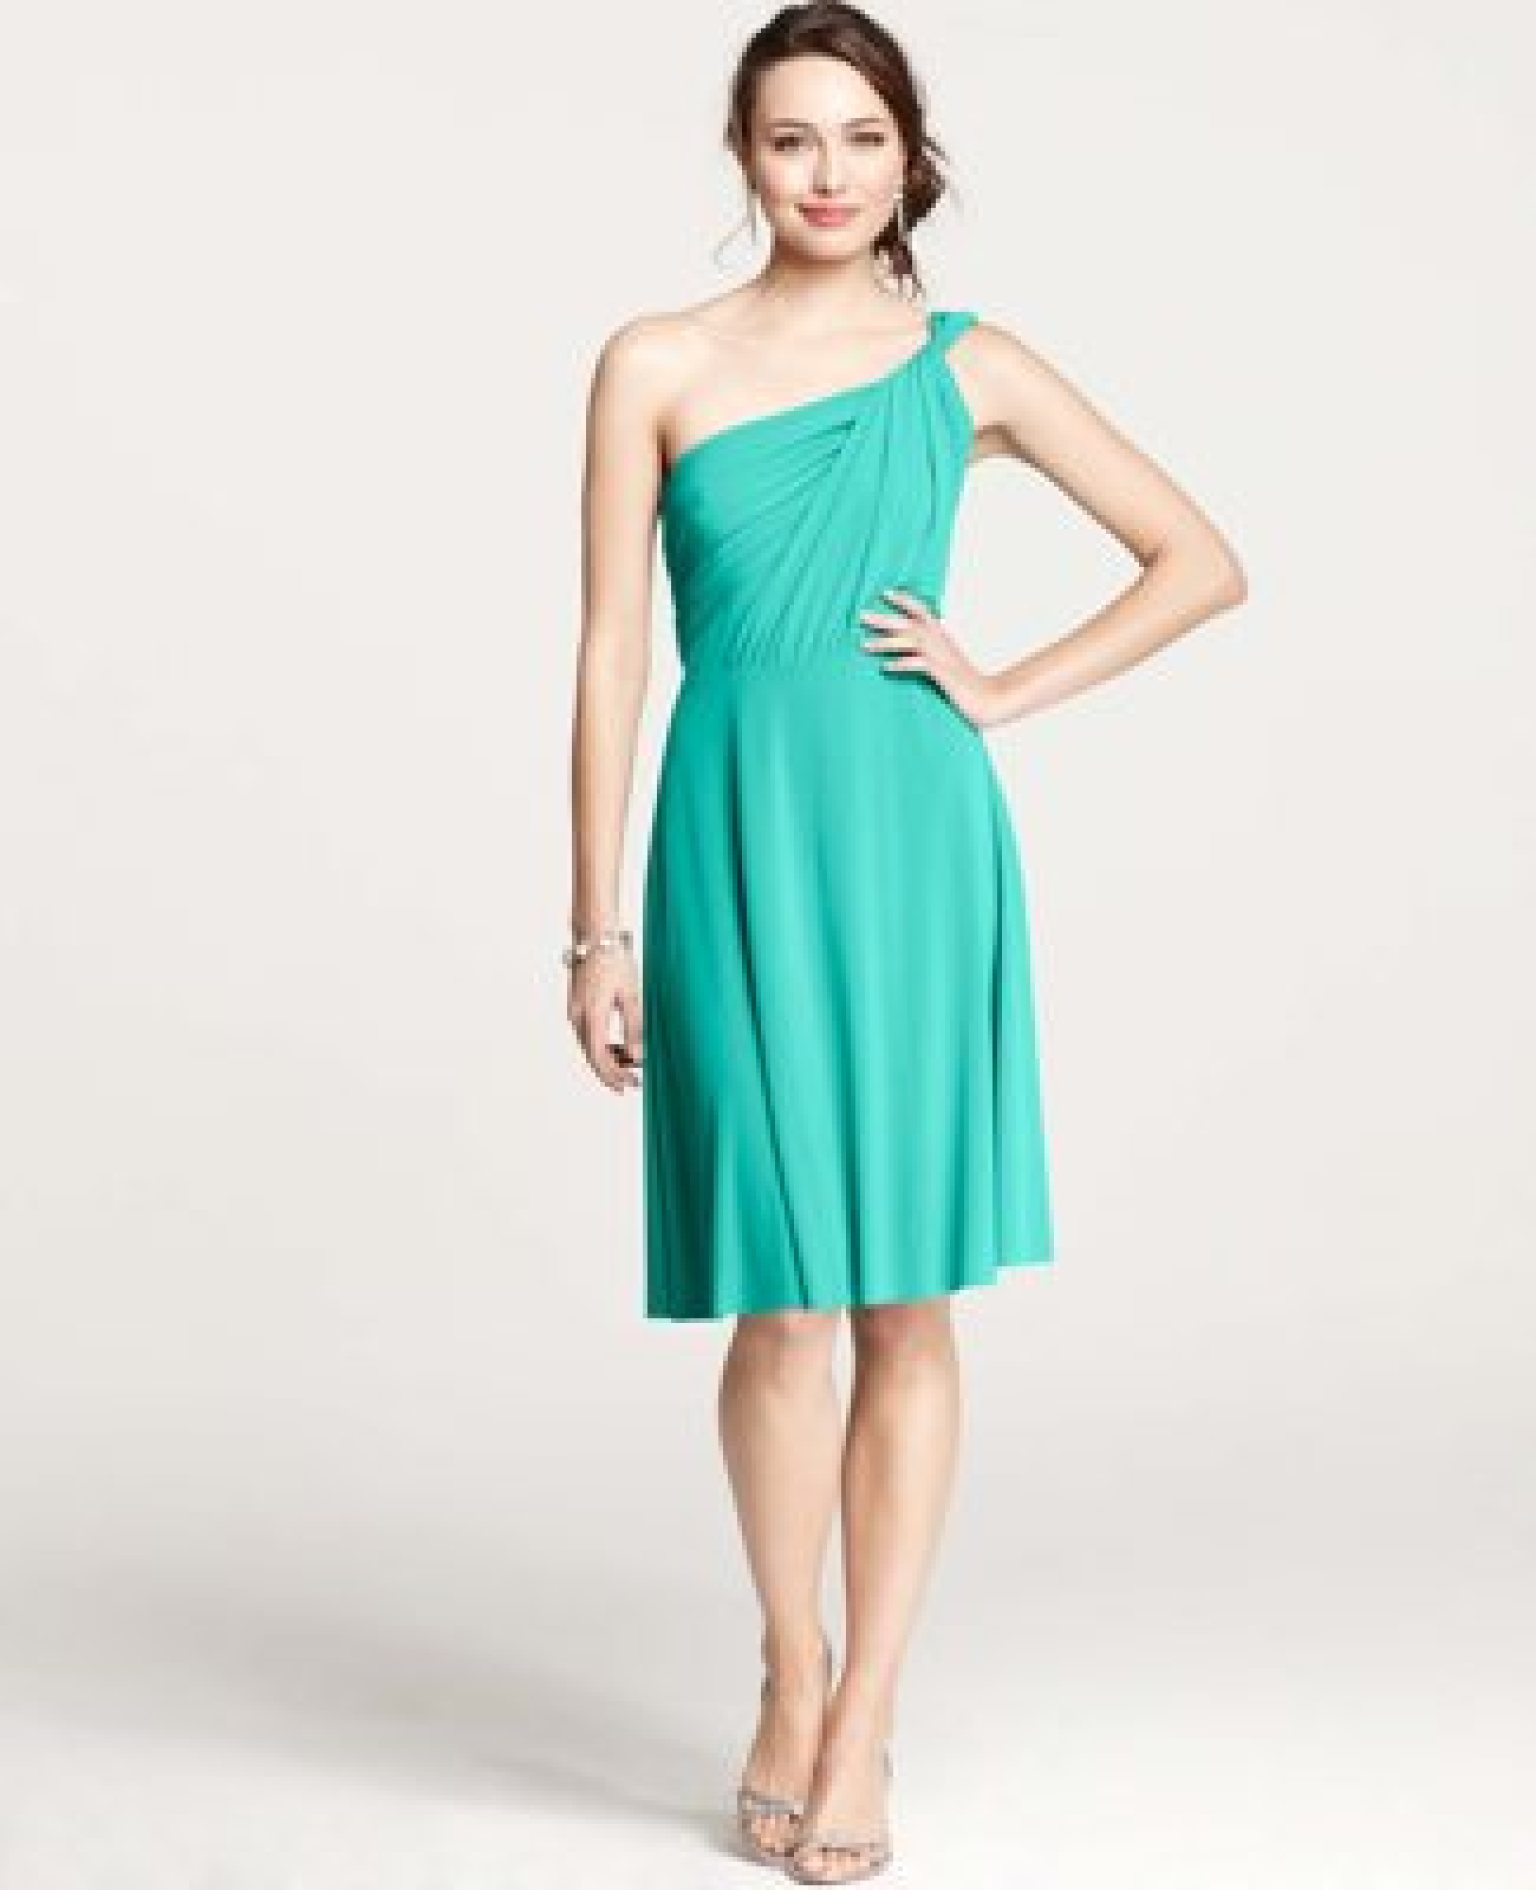 Wedding Guest Dresses For Summer Affairs (PHOTOS) HuffPost